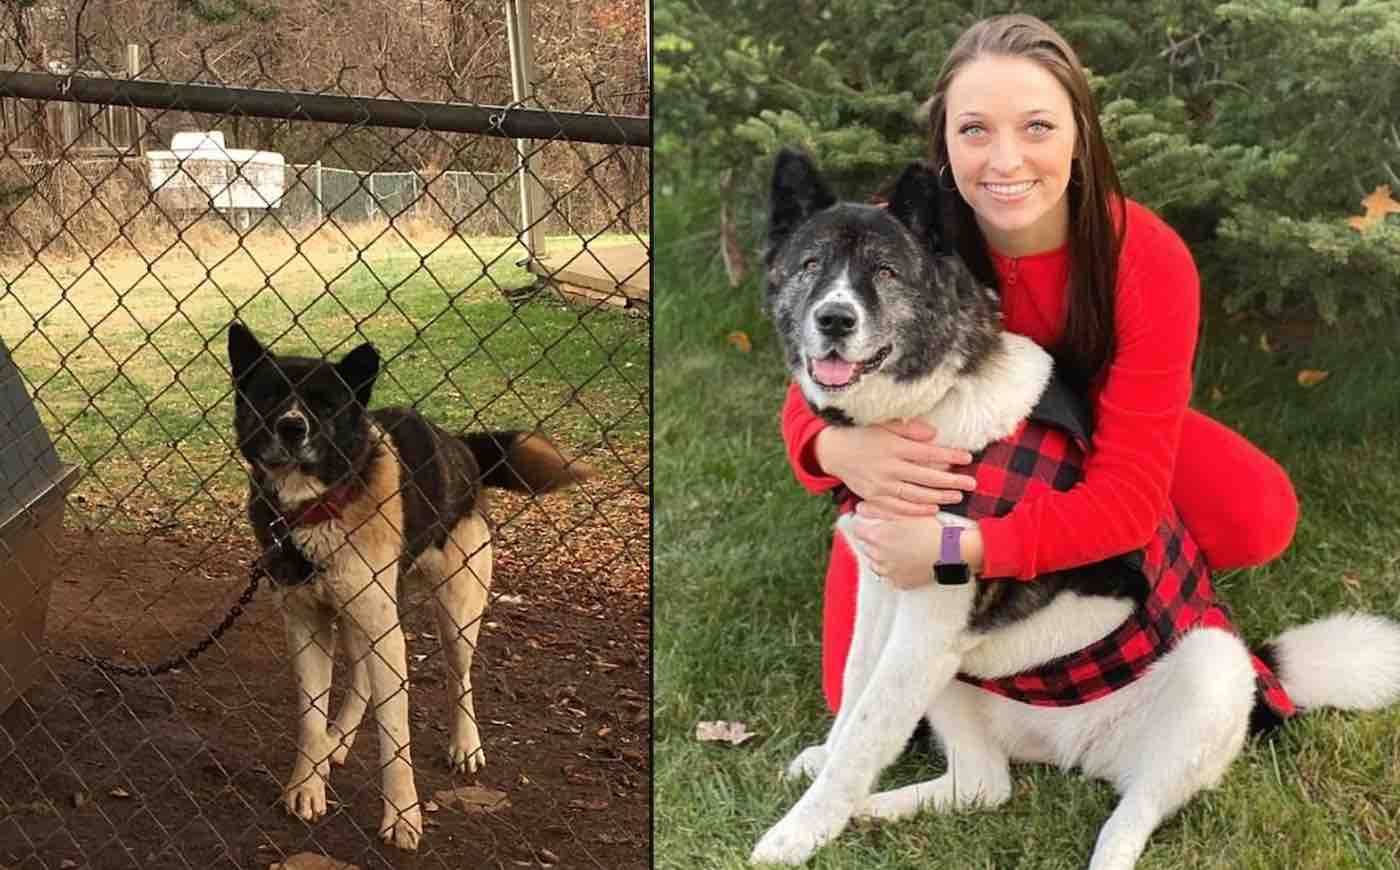 Woman Who Visited and Fed Chained-Up Dog for a Year Finally Gets to Adopt it From Neighbor's Yard